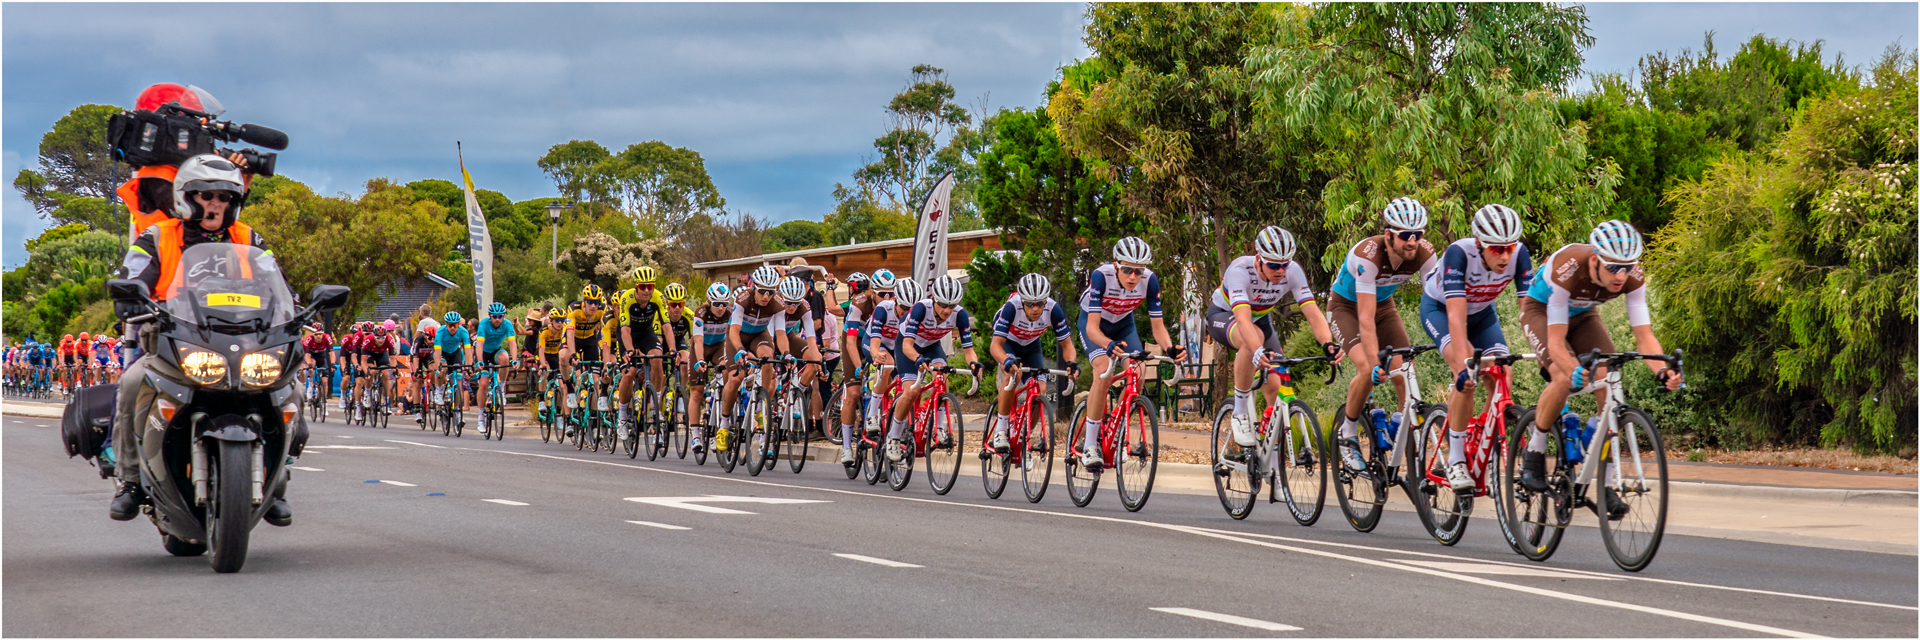 Ross Lange Highly Commended PelotoninView May 2020   Nature